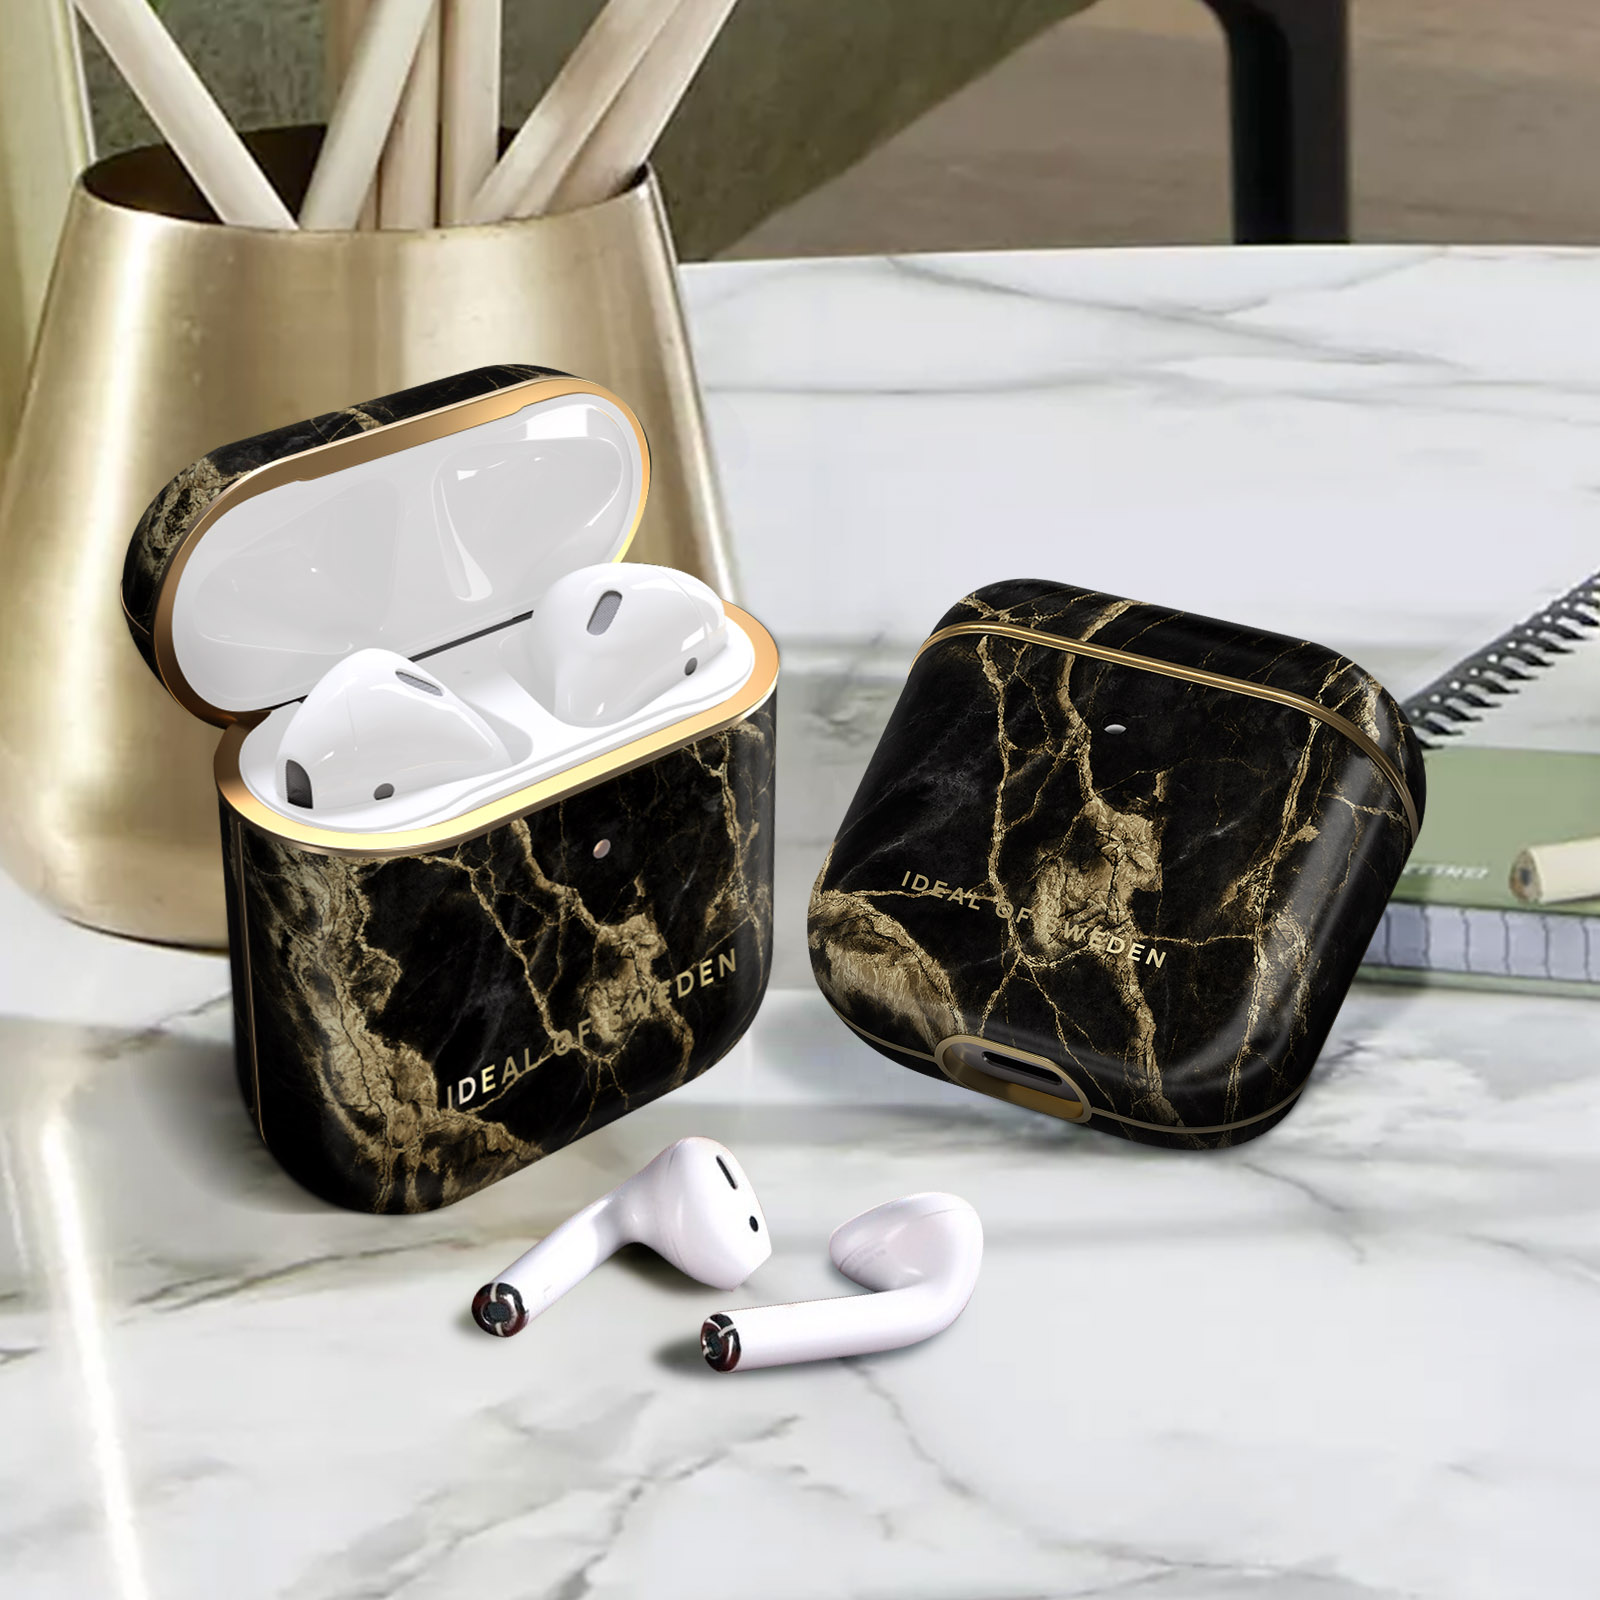 IDFAPC-191 SWEDEN Apple Cover AirPod Smoke Full passend IDEAL Golden Marble OF Case für: